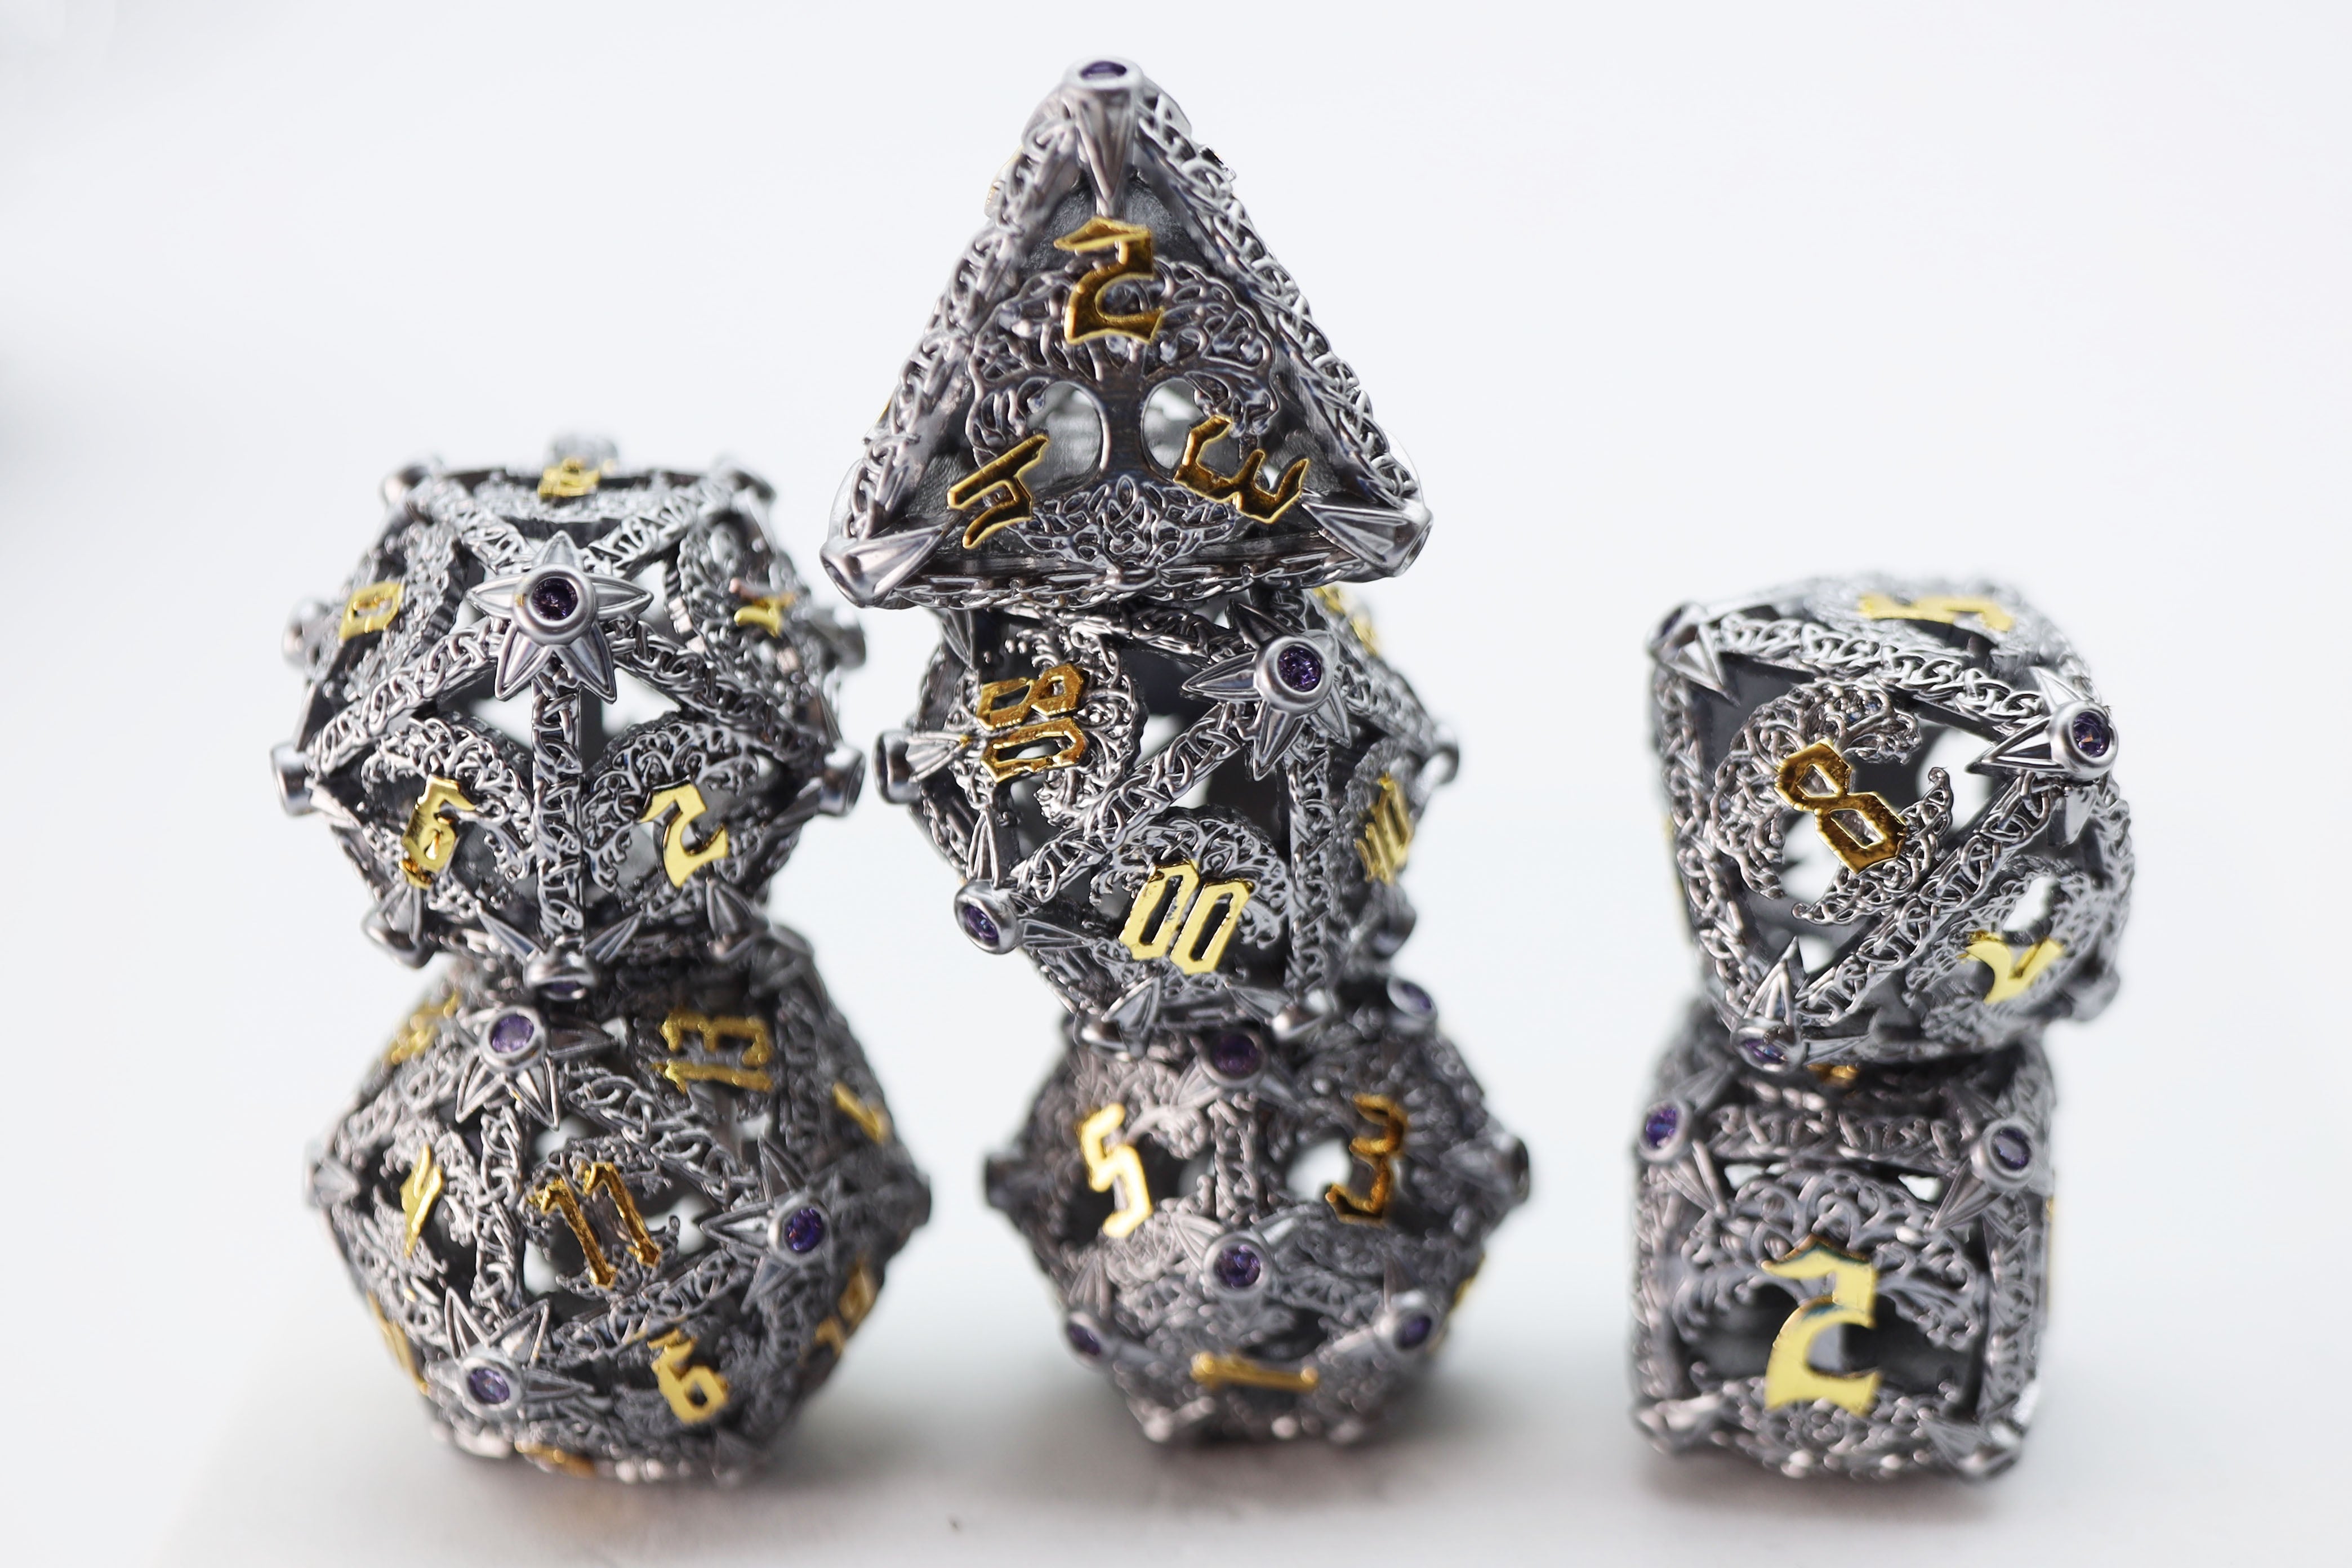 Trees of Virtue: Tree of Philomathy - Hollow Metal RPG Dice Set - Bards & Cards